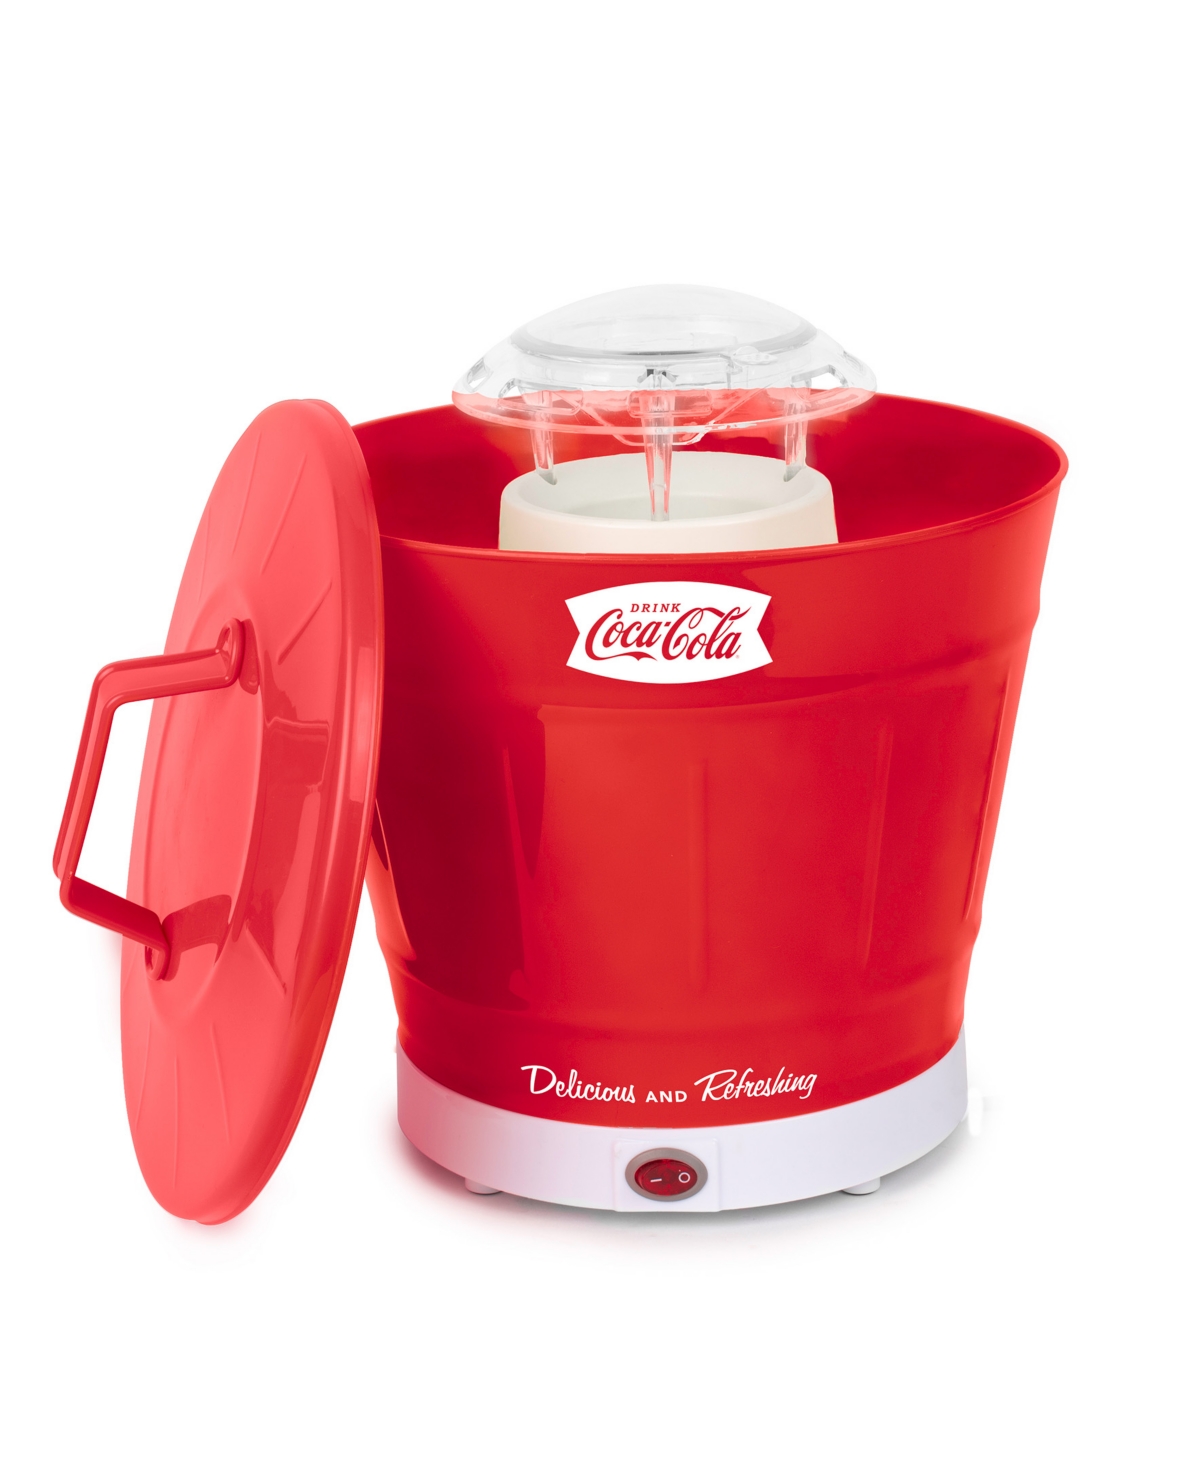 Coca-cola Hot Air 10.08" Popcorn Popper With Bucket In Red